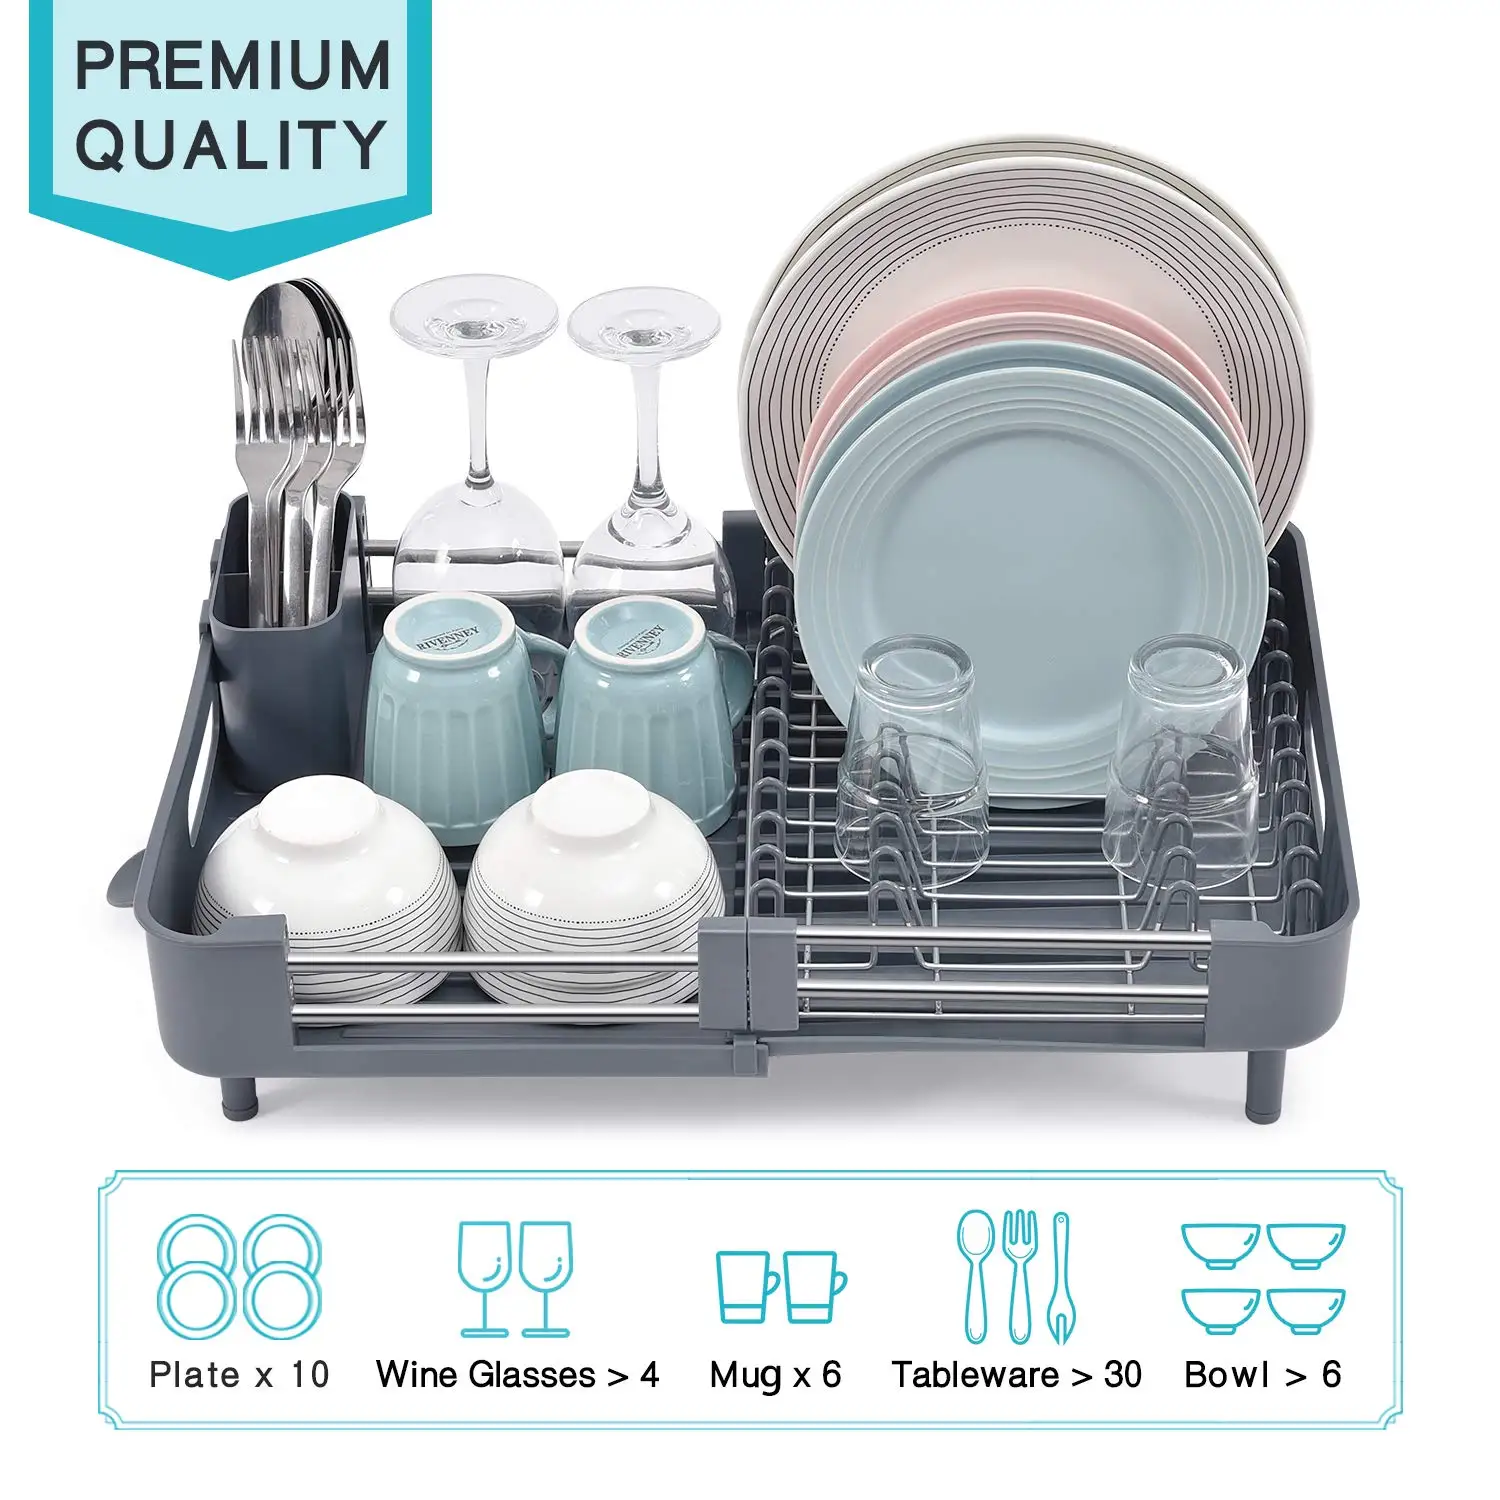 https://ae01.alicdn.com/kf/Scc04b9b1c8b04ee1950c8f1d71c7424bQ/Stainless-Steel-Dish-Drying-Rack-Adjustable-Kitchen-Plates-Organizer-with-Drainboard-Over-Sink-Countertop-Cutlery-Storage.jpg